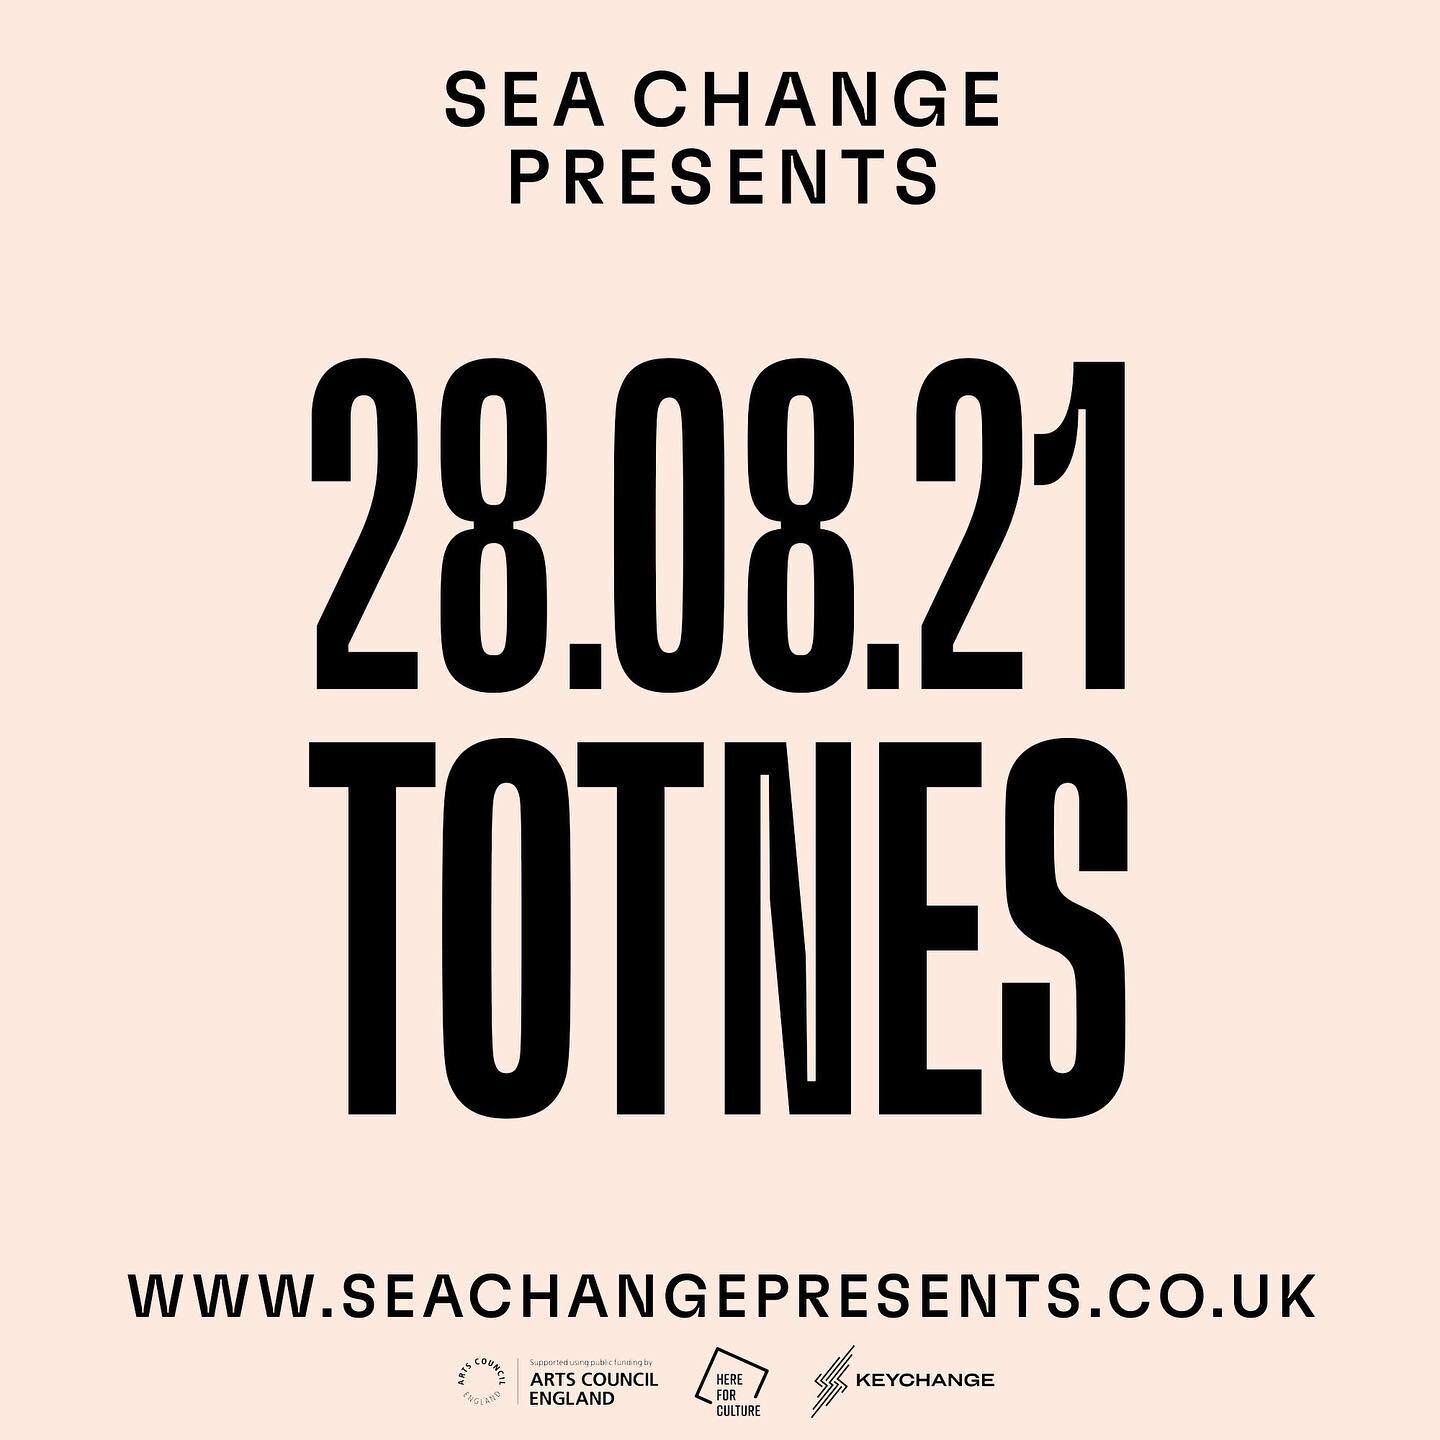 SEA CHANGE PRESENTS x THE BULL 
28.08.21 
TOTNES

We are pleased to announce that we are collaborating with our friends at @seachangepresents &amp; @driftrecordshop in hosting an afternoon of drop-in conversations and (bookable in advance) supper ses